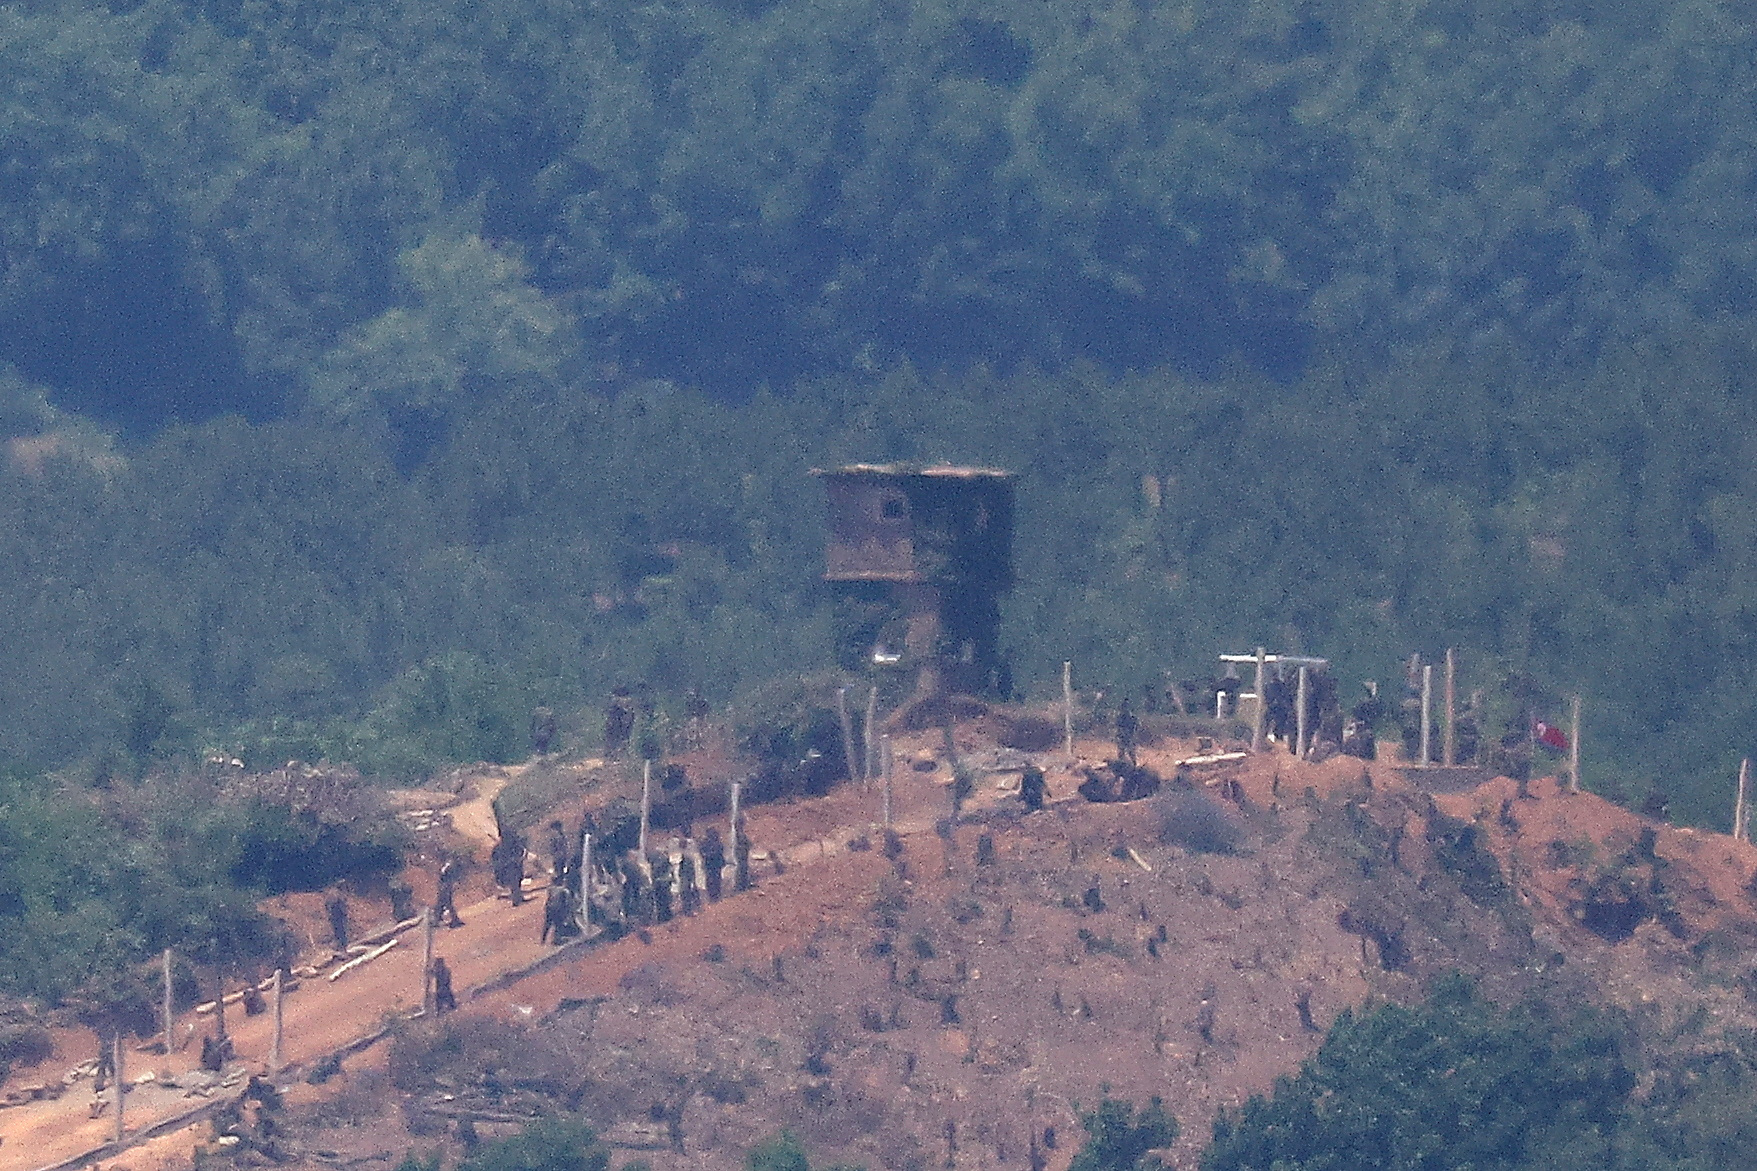 North Korean people work on a military fence near their guard post at the inter-Korean border